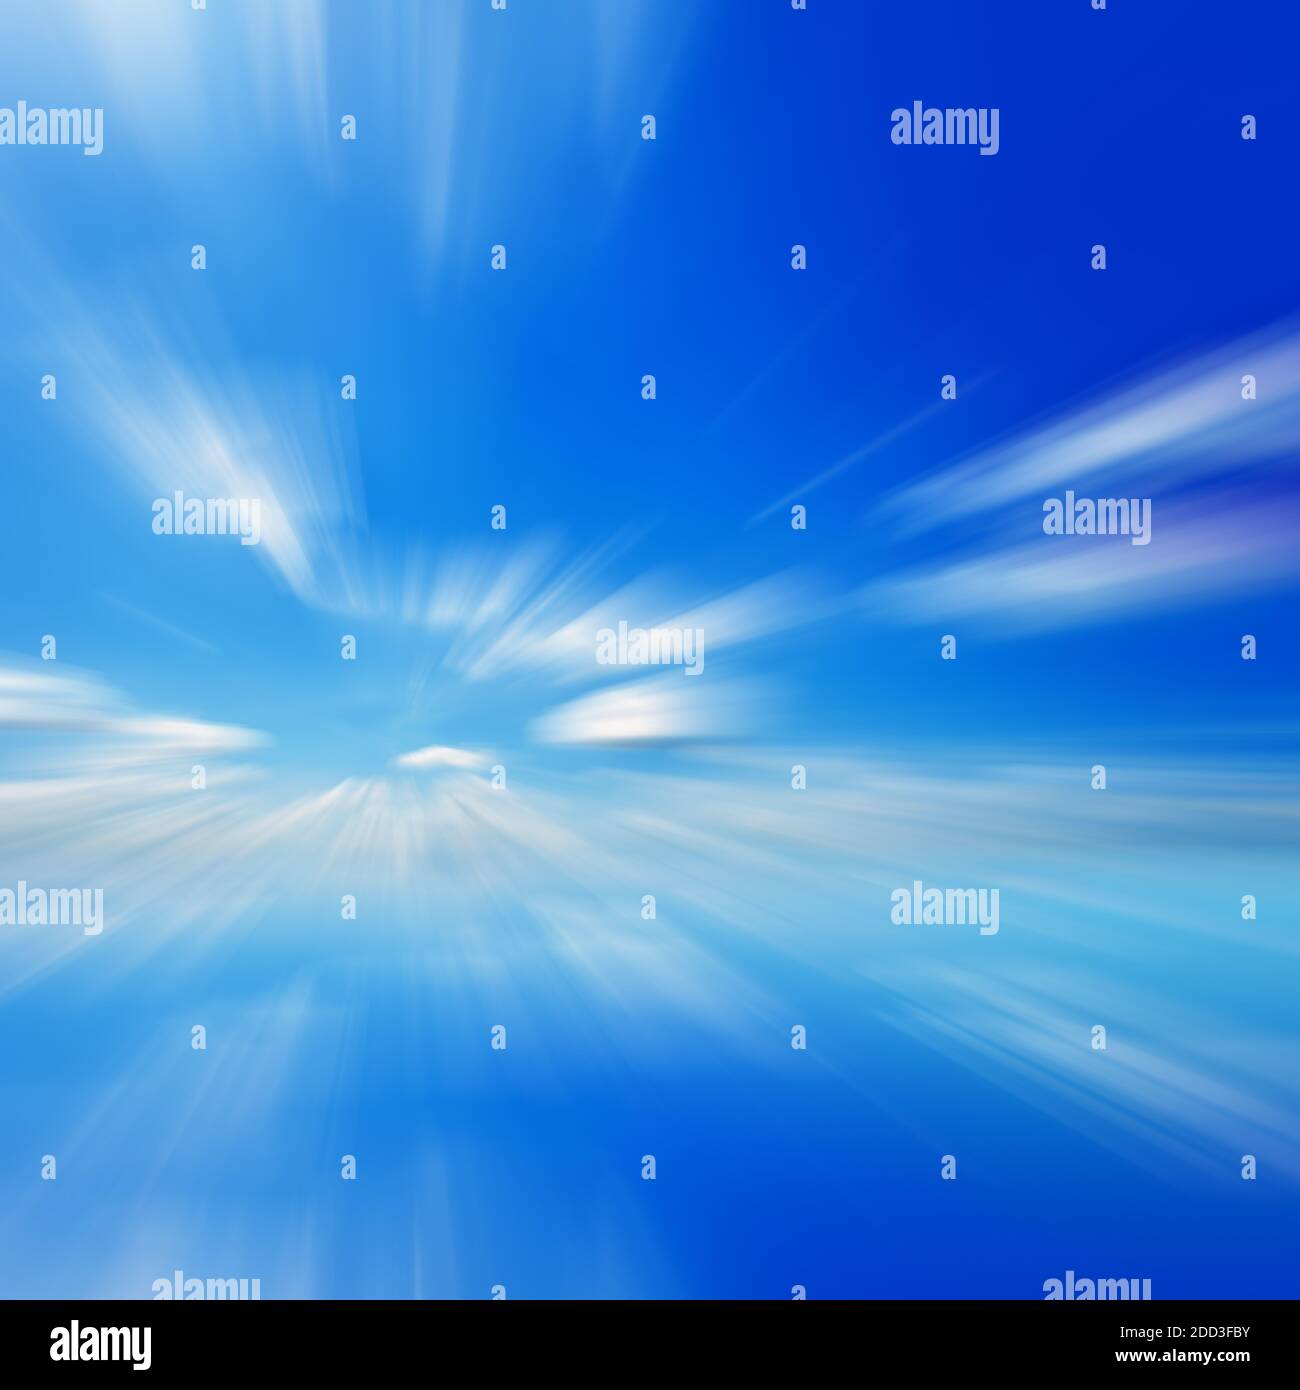 Blue sky abstract background with fast motion blur effect Stock Photo